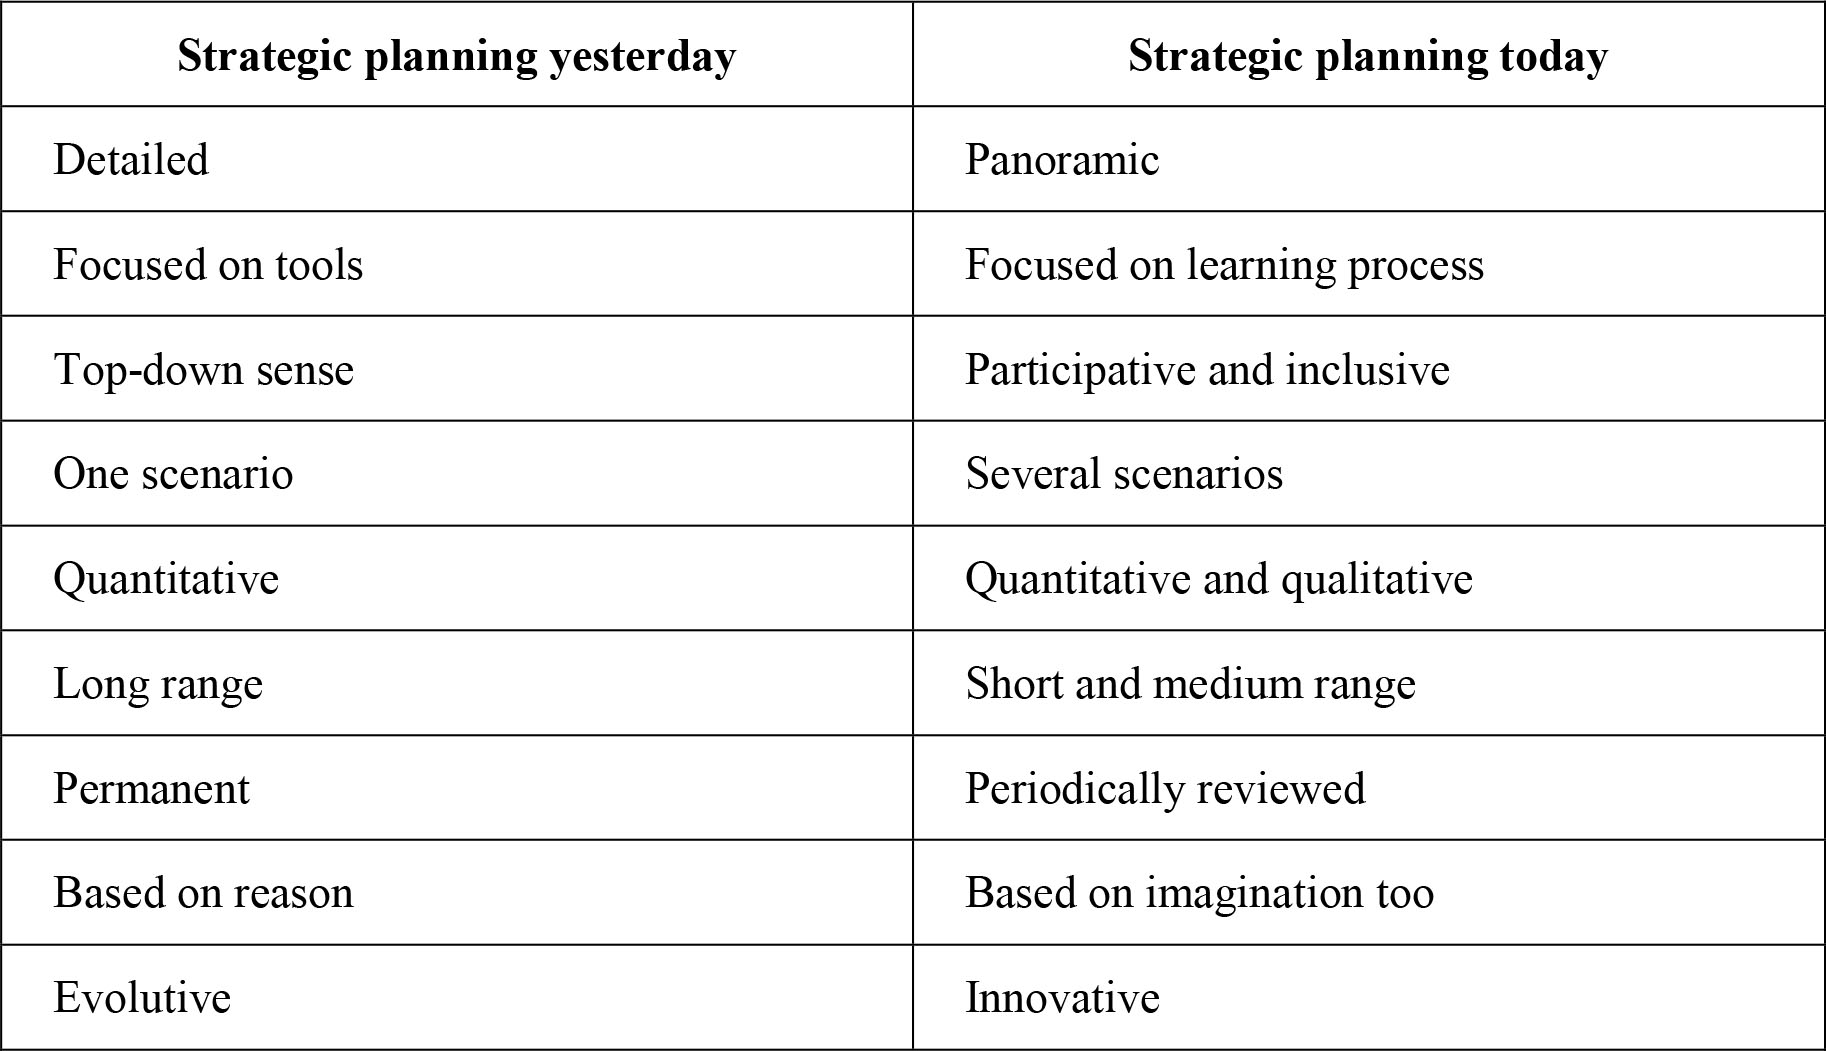 Strategic planning, yesterday and today